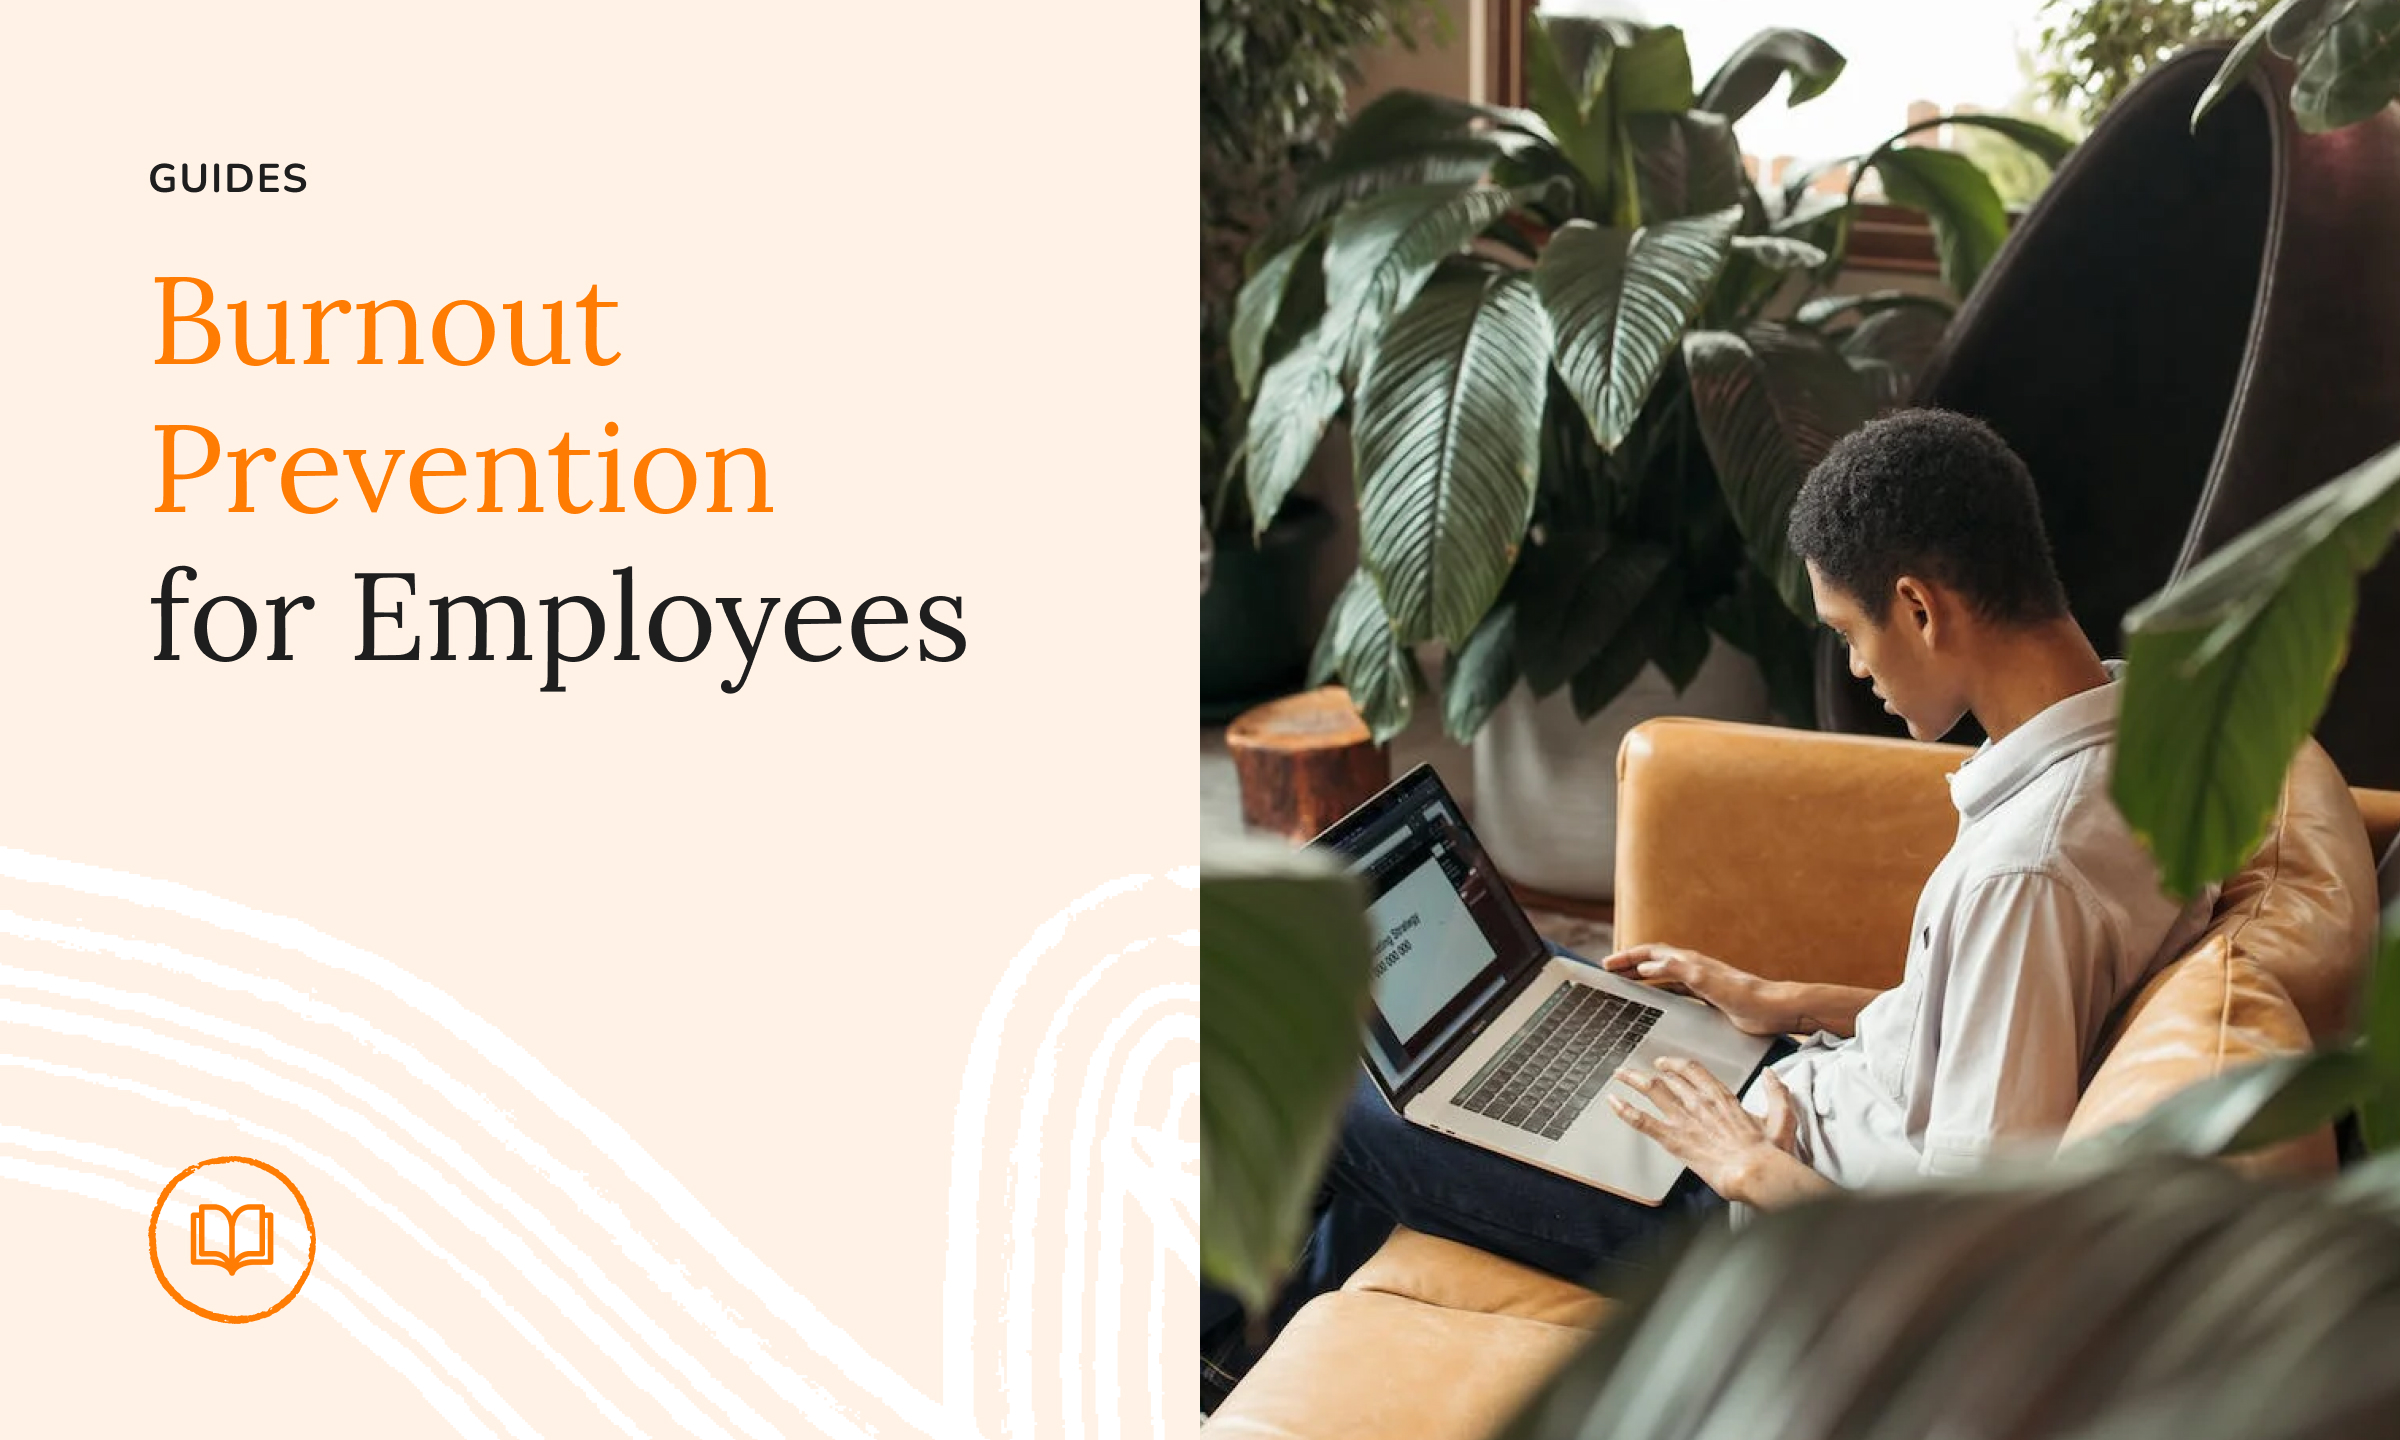 Burnout Prevention for Employees
